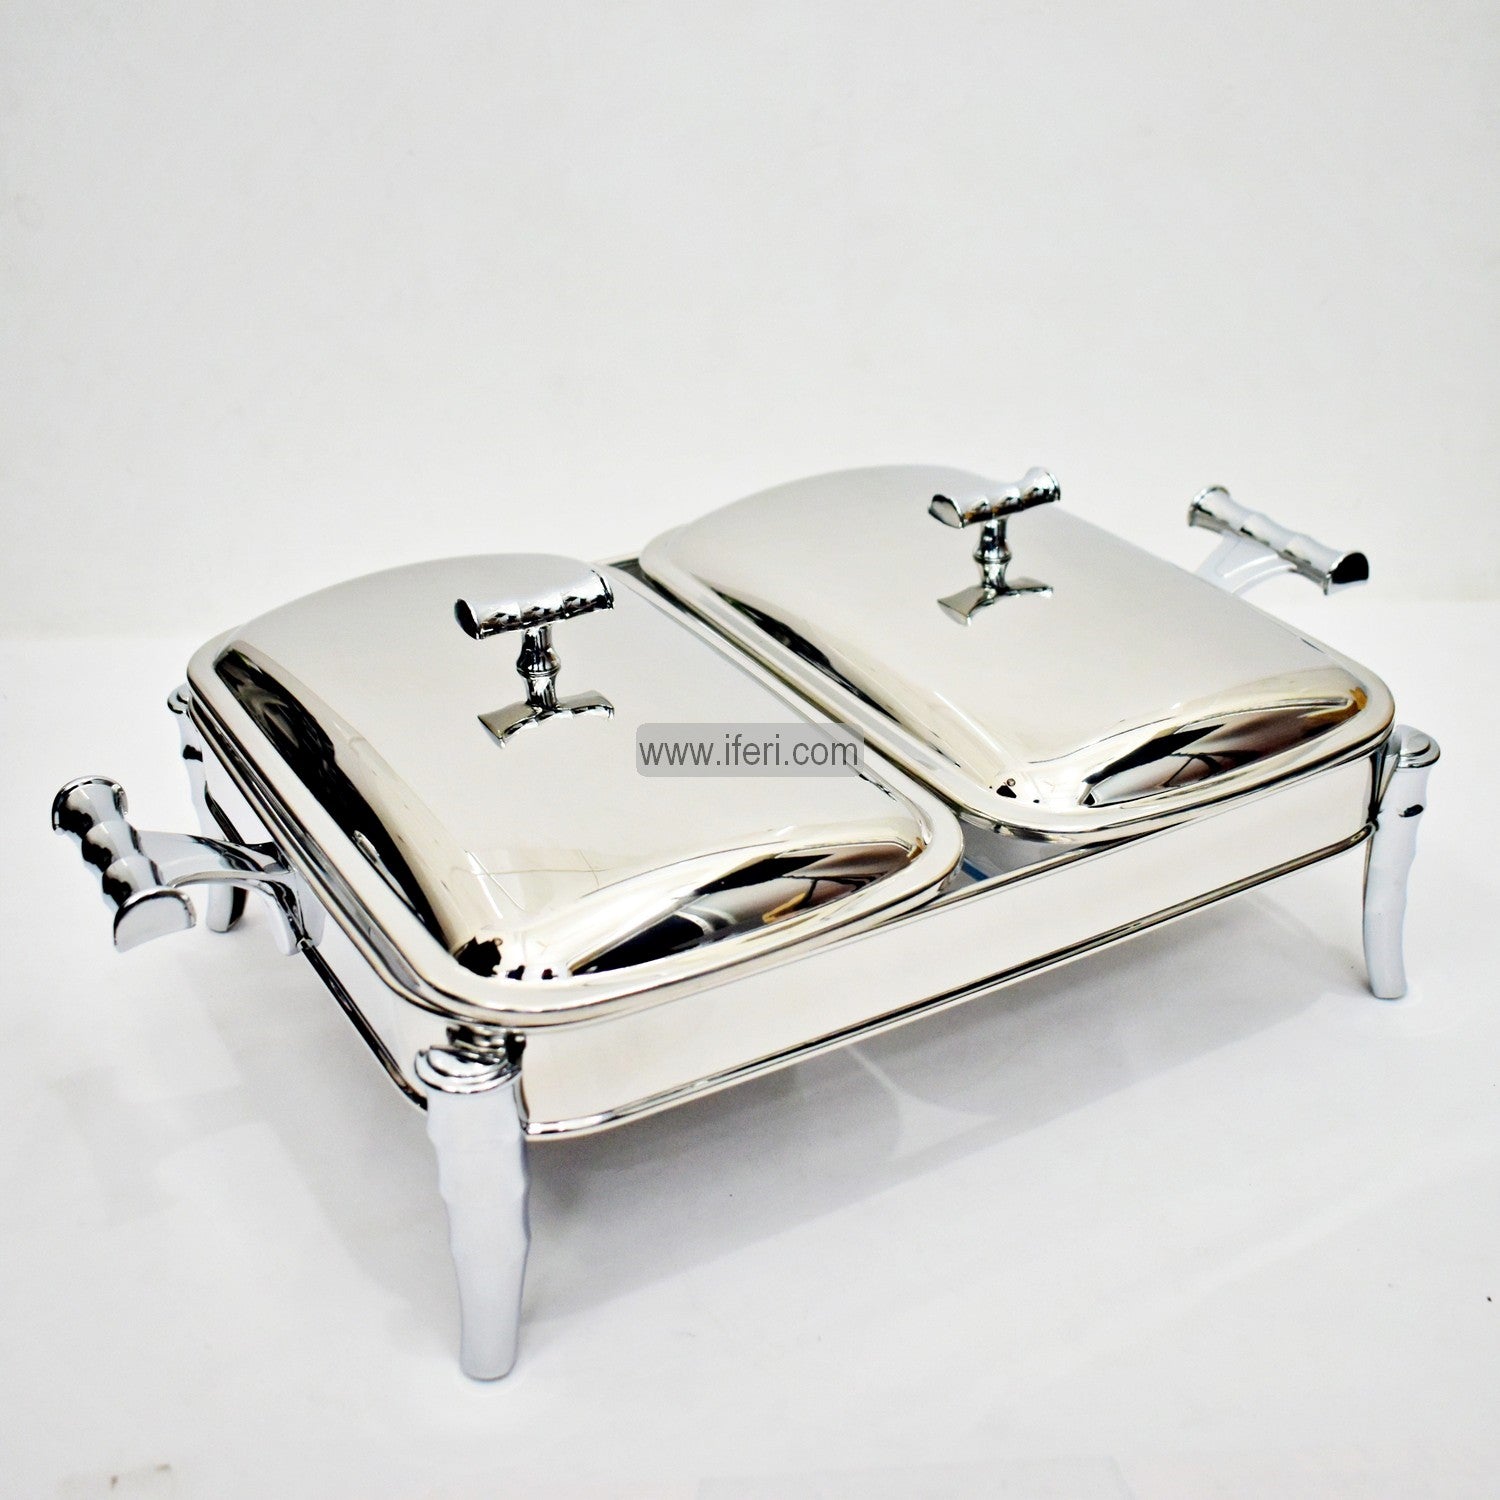 3.6 Liter Exclusive Chafing Dish Food Warmer SY11884